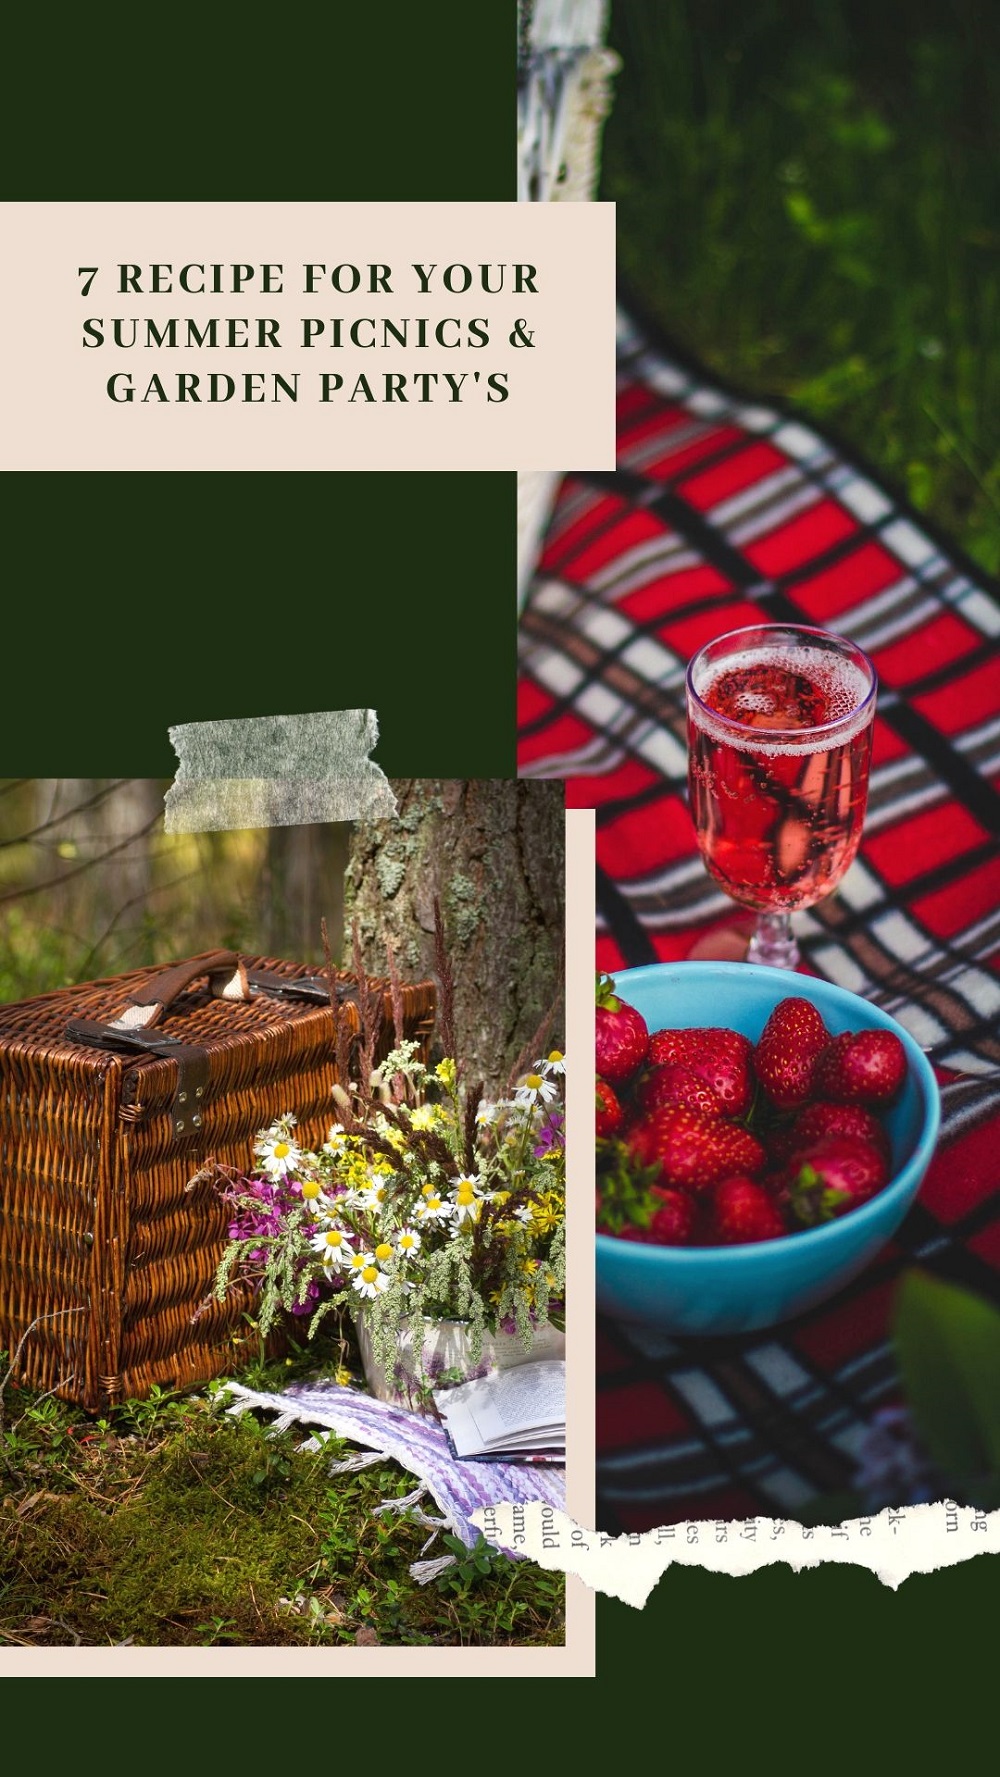 7 Recipe For Your Summer Picnics & Garden Party's 